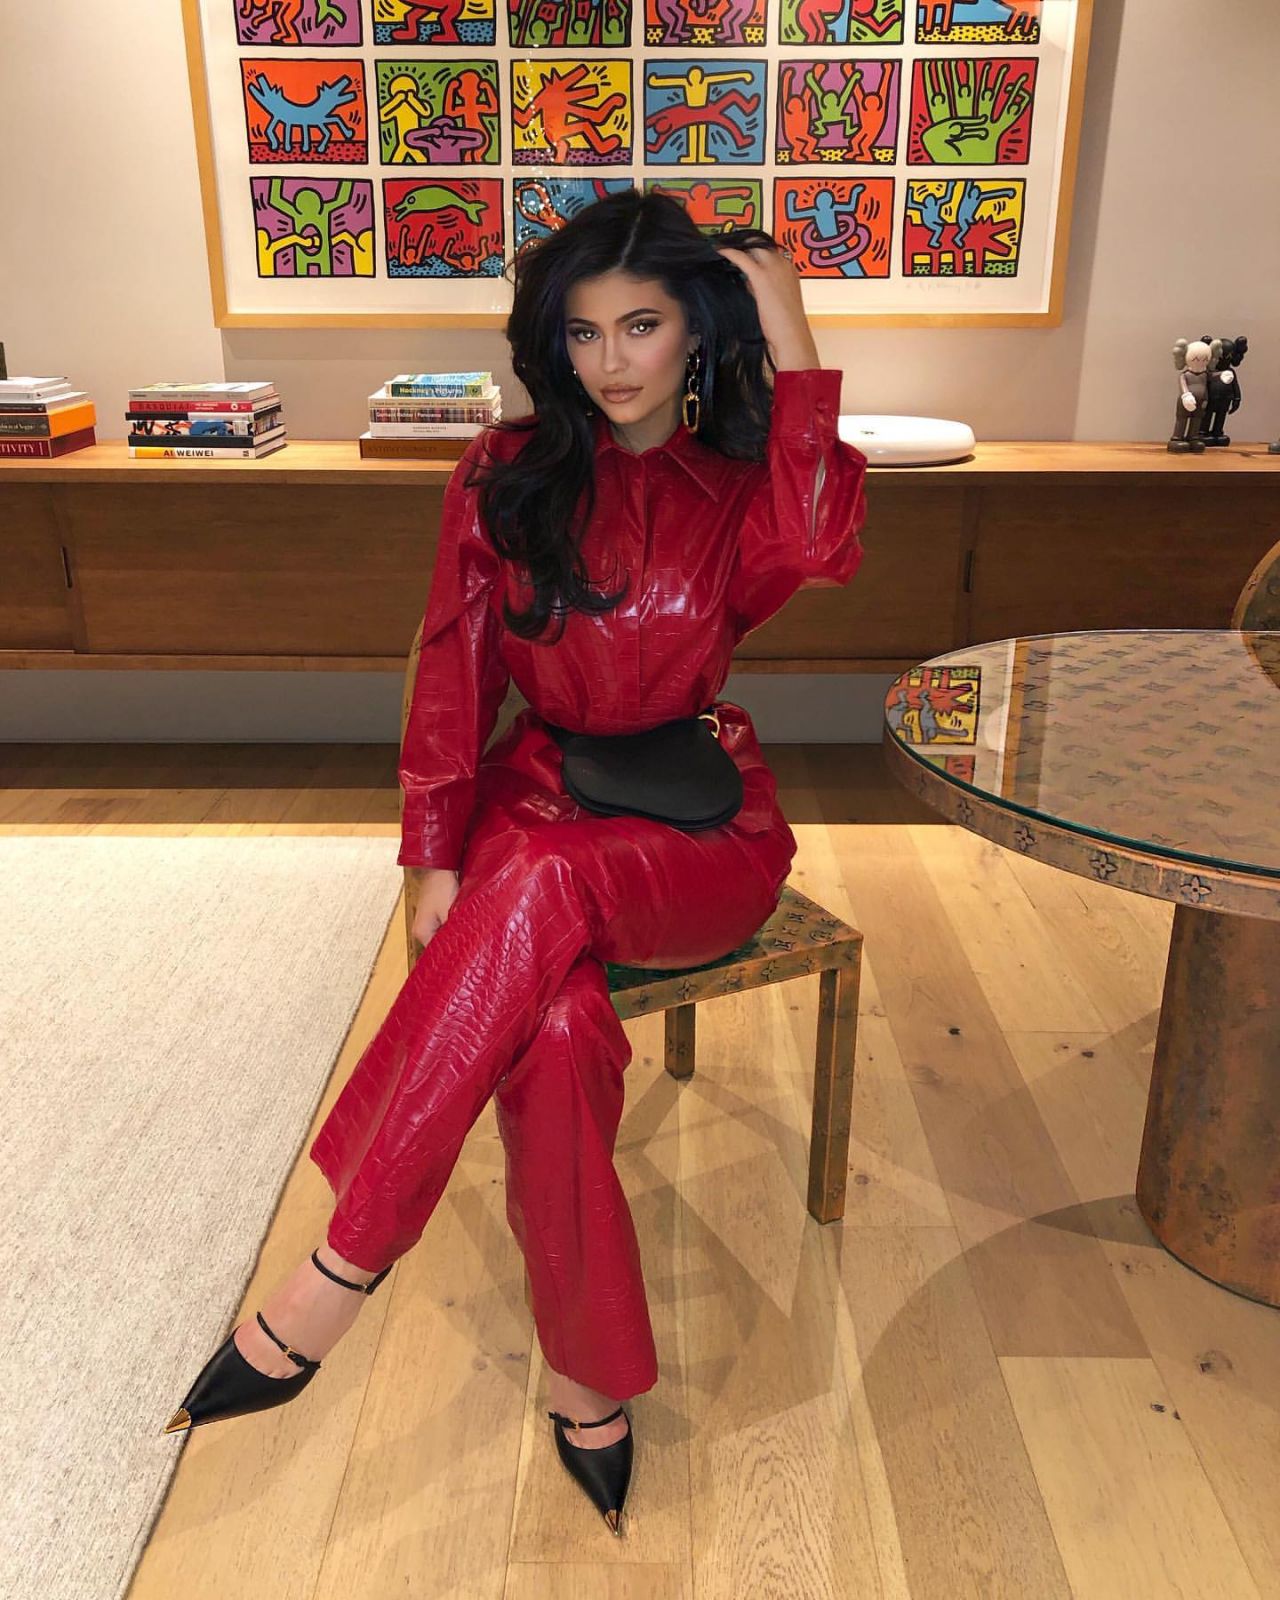 Kylie Jenner in sexy red outfit and heels social media photos